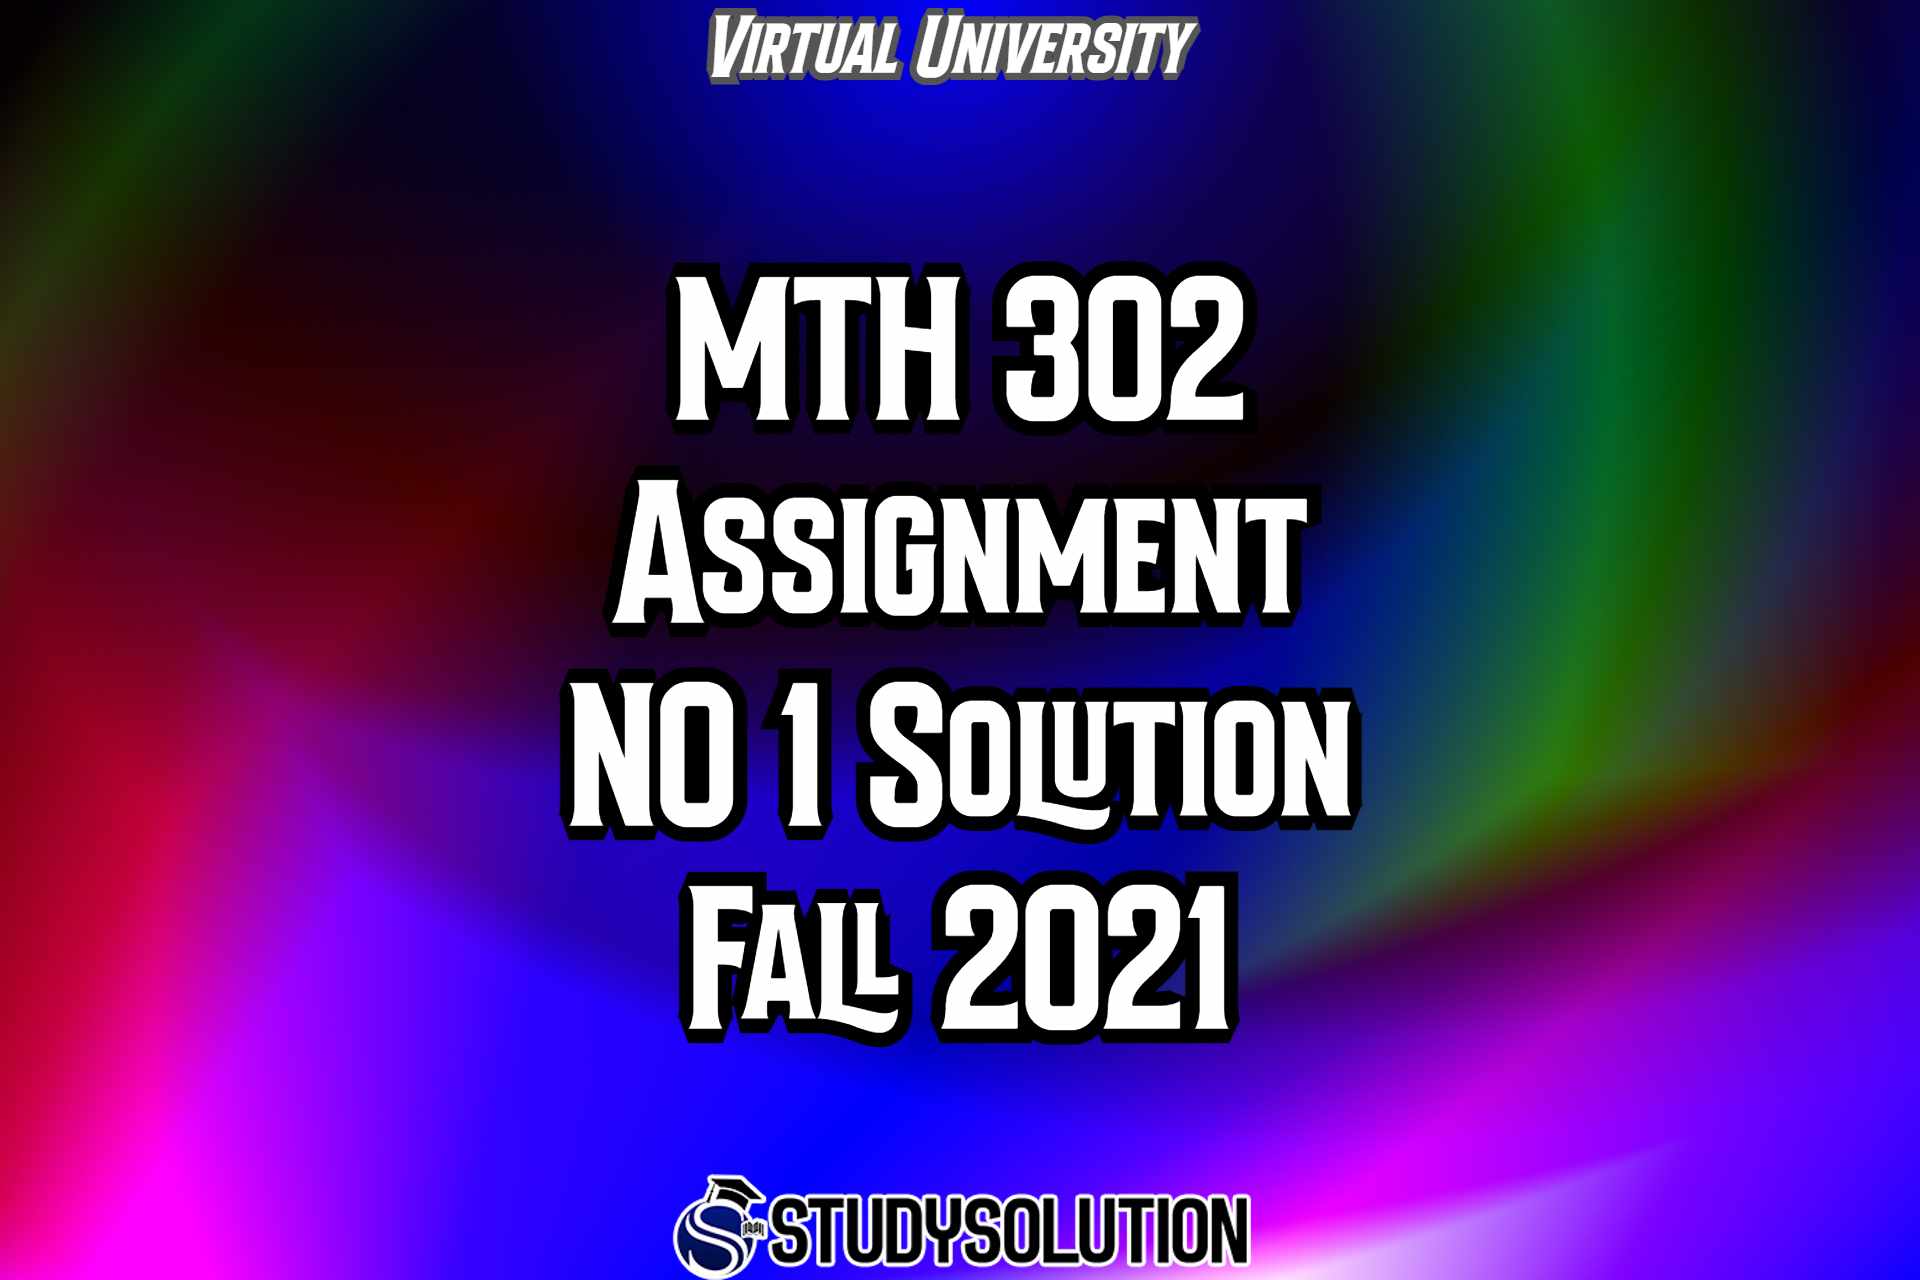 MTH302 Assignment NO 1 Solution Fall 2021